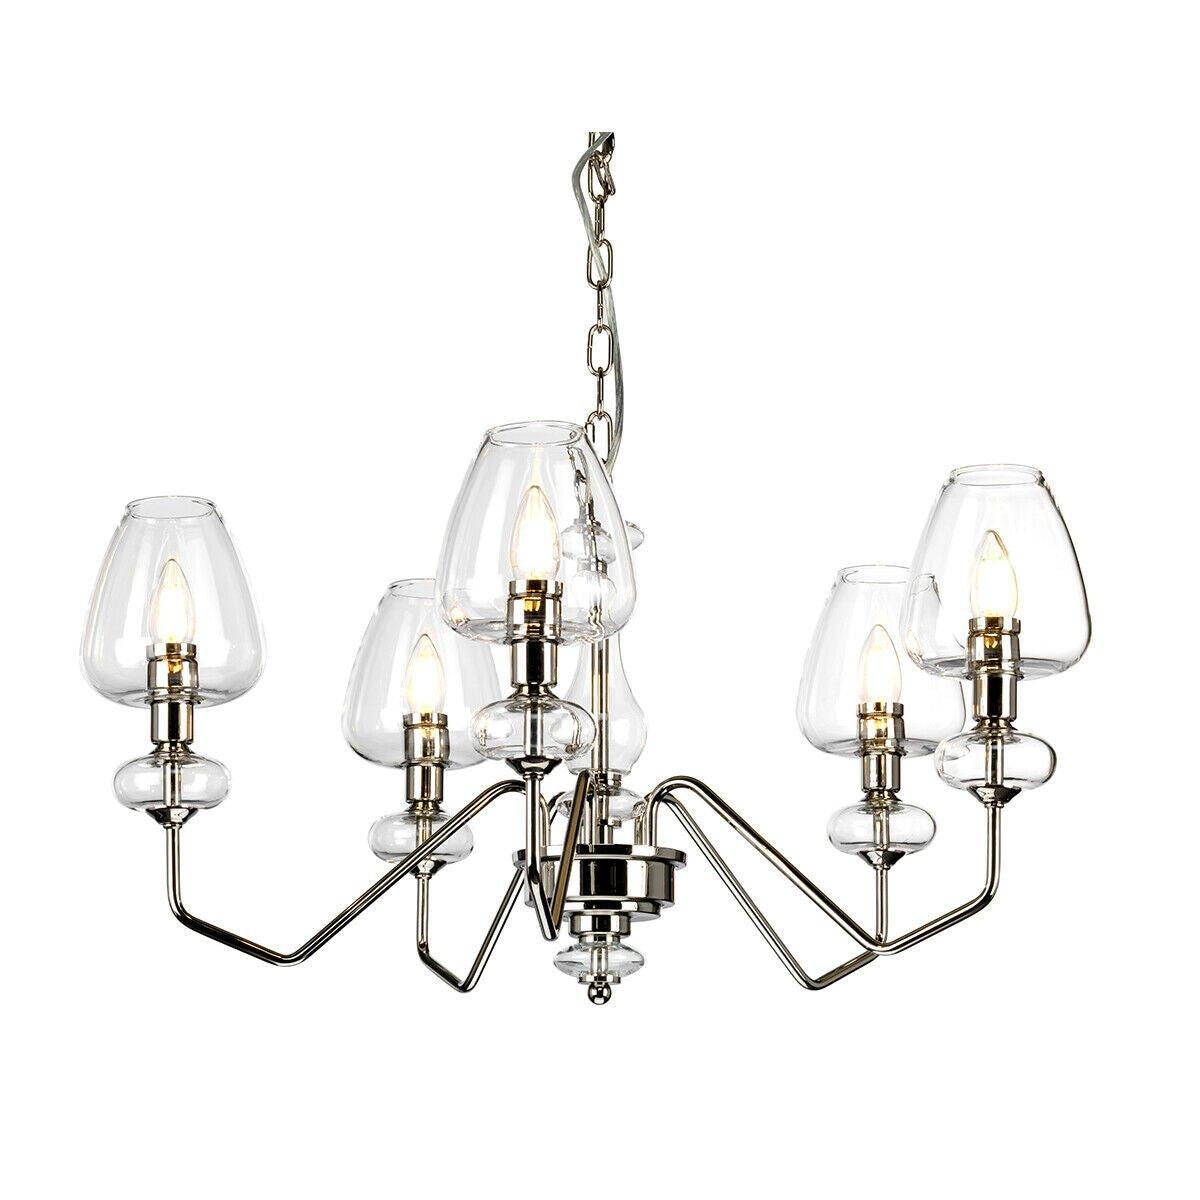 5 Bulb Chandelier Highly Polished Nickel Finish Clear Glass Shades LED E14 40W